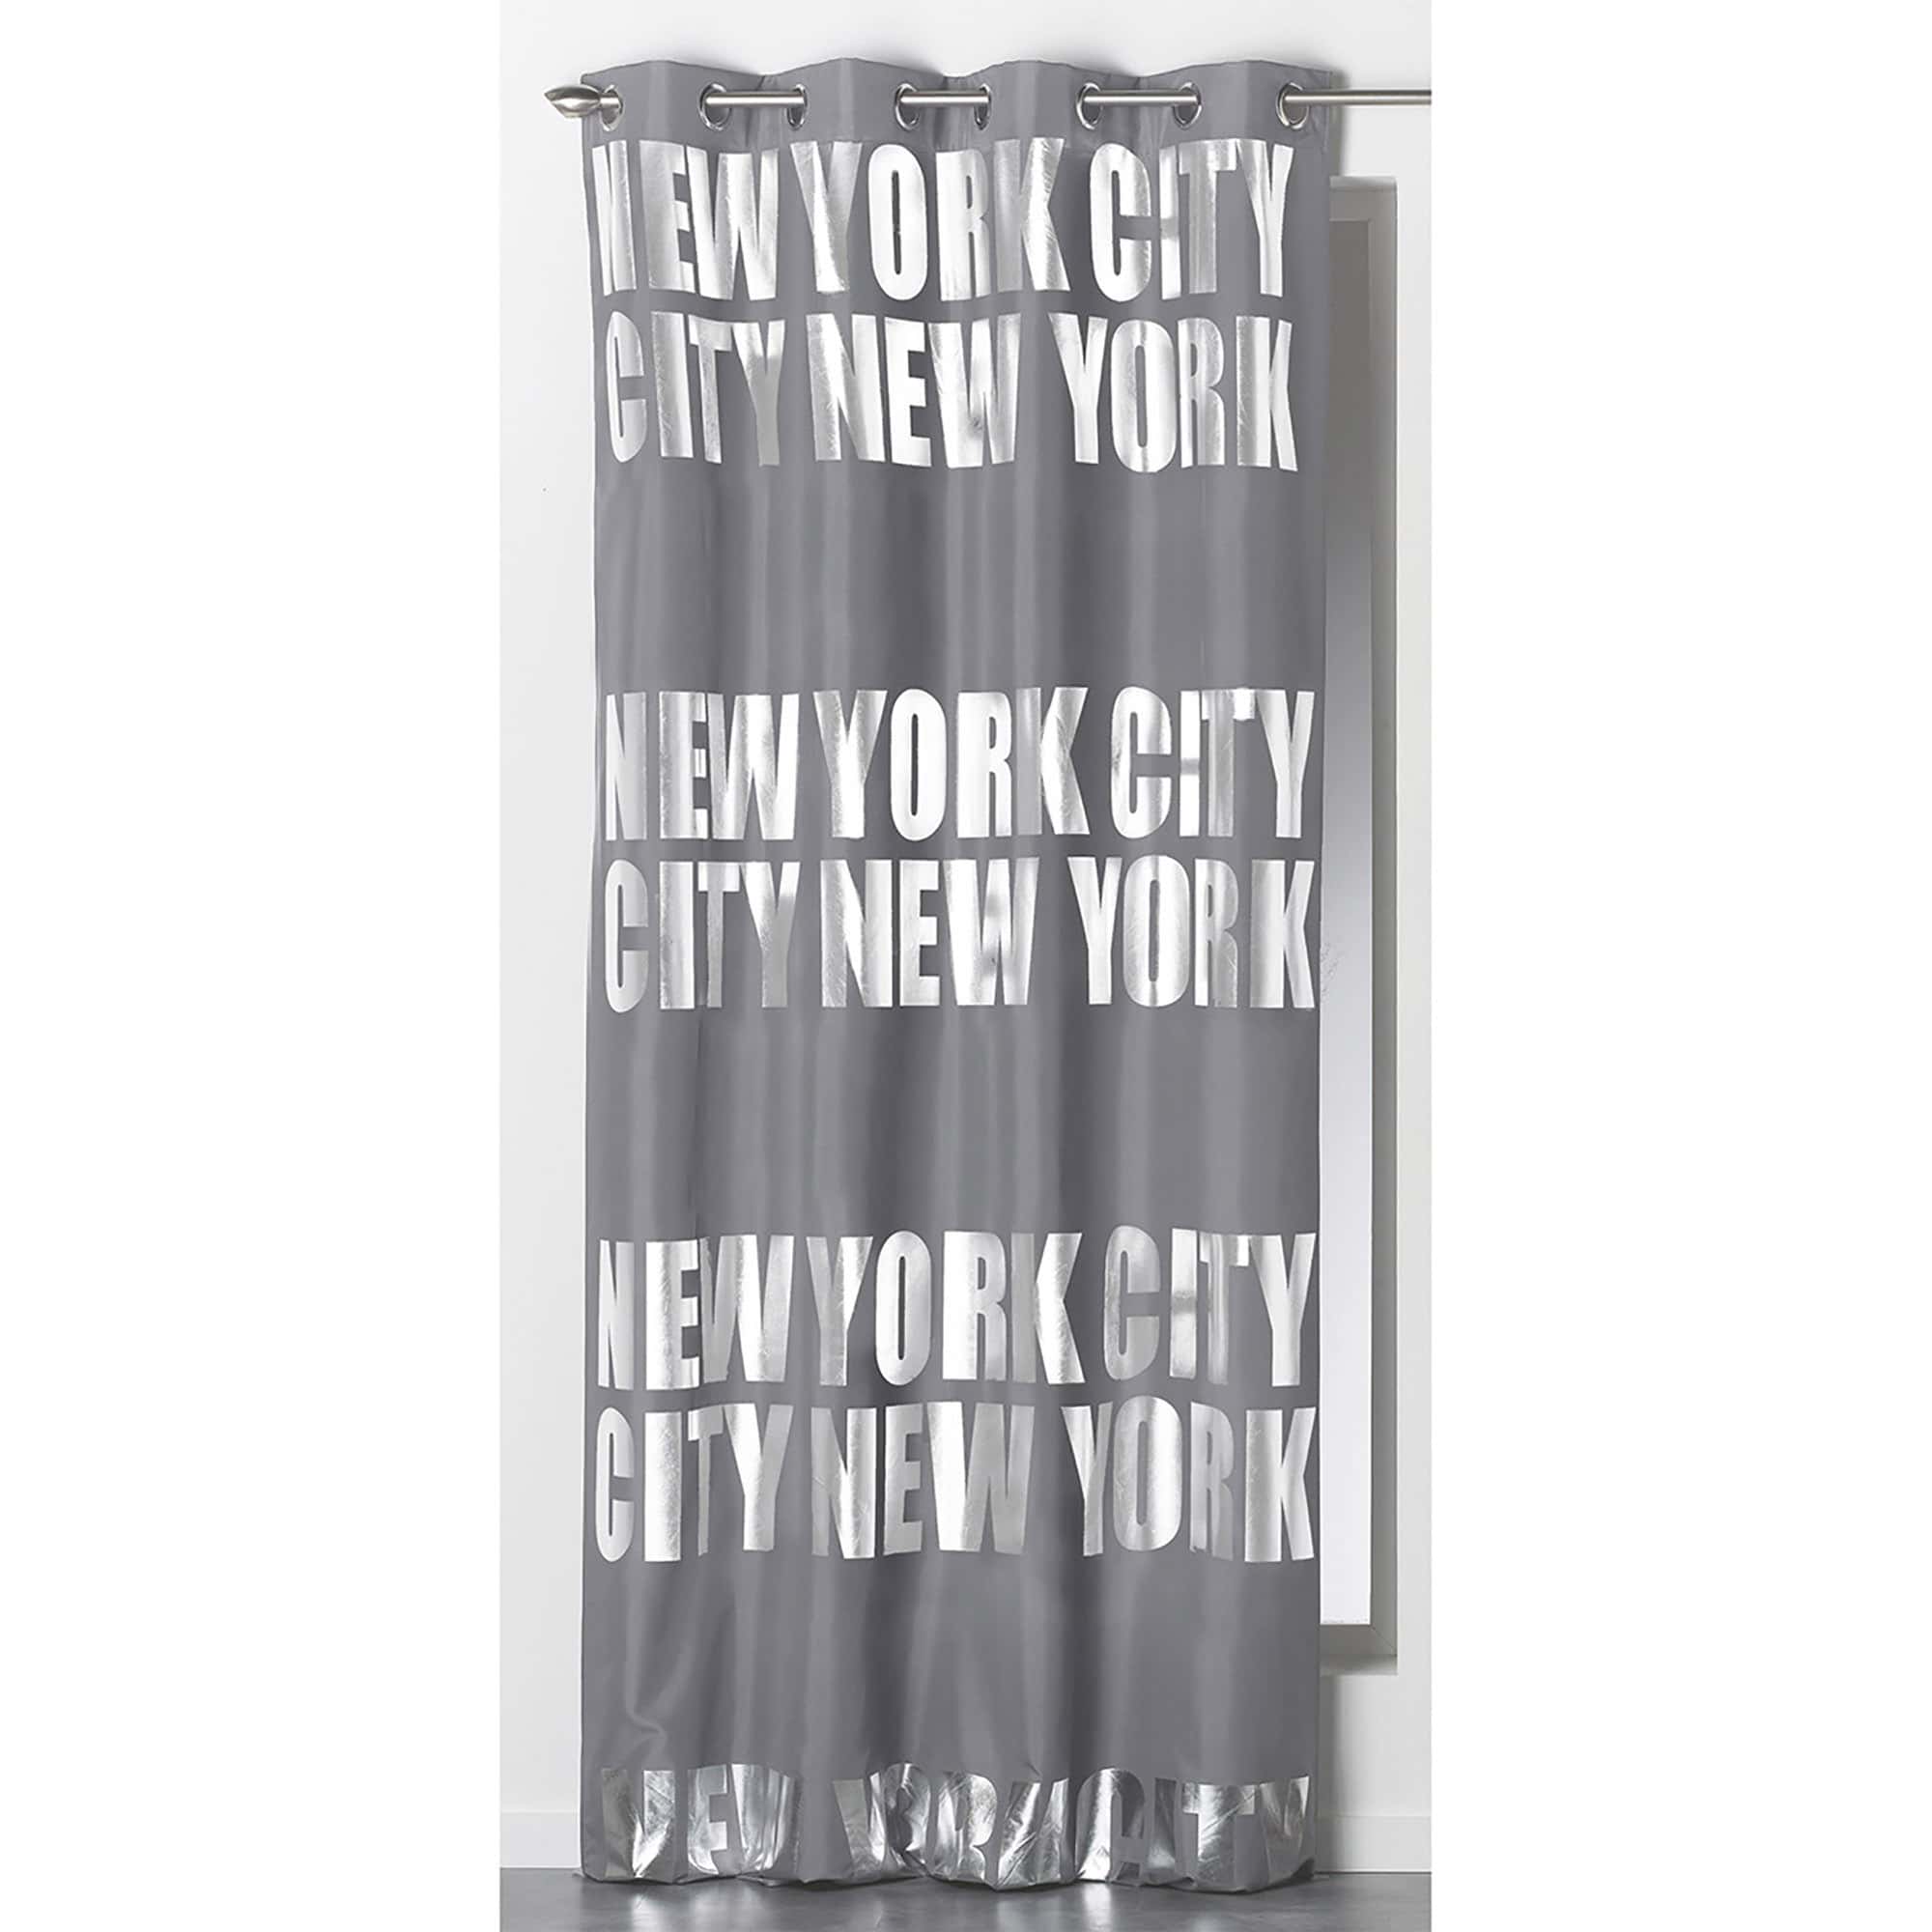 solid gray black out curtain silver NYC lettering 1 panel for large window